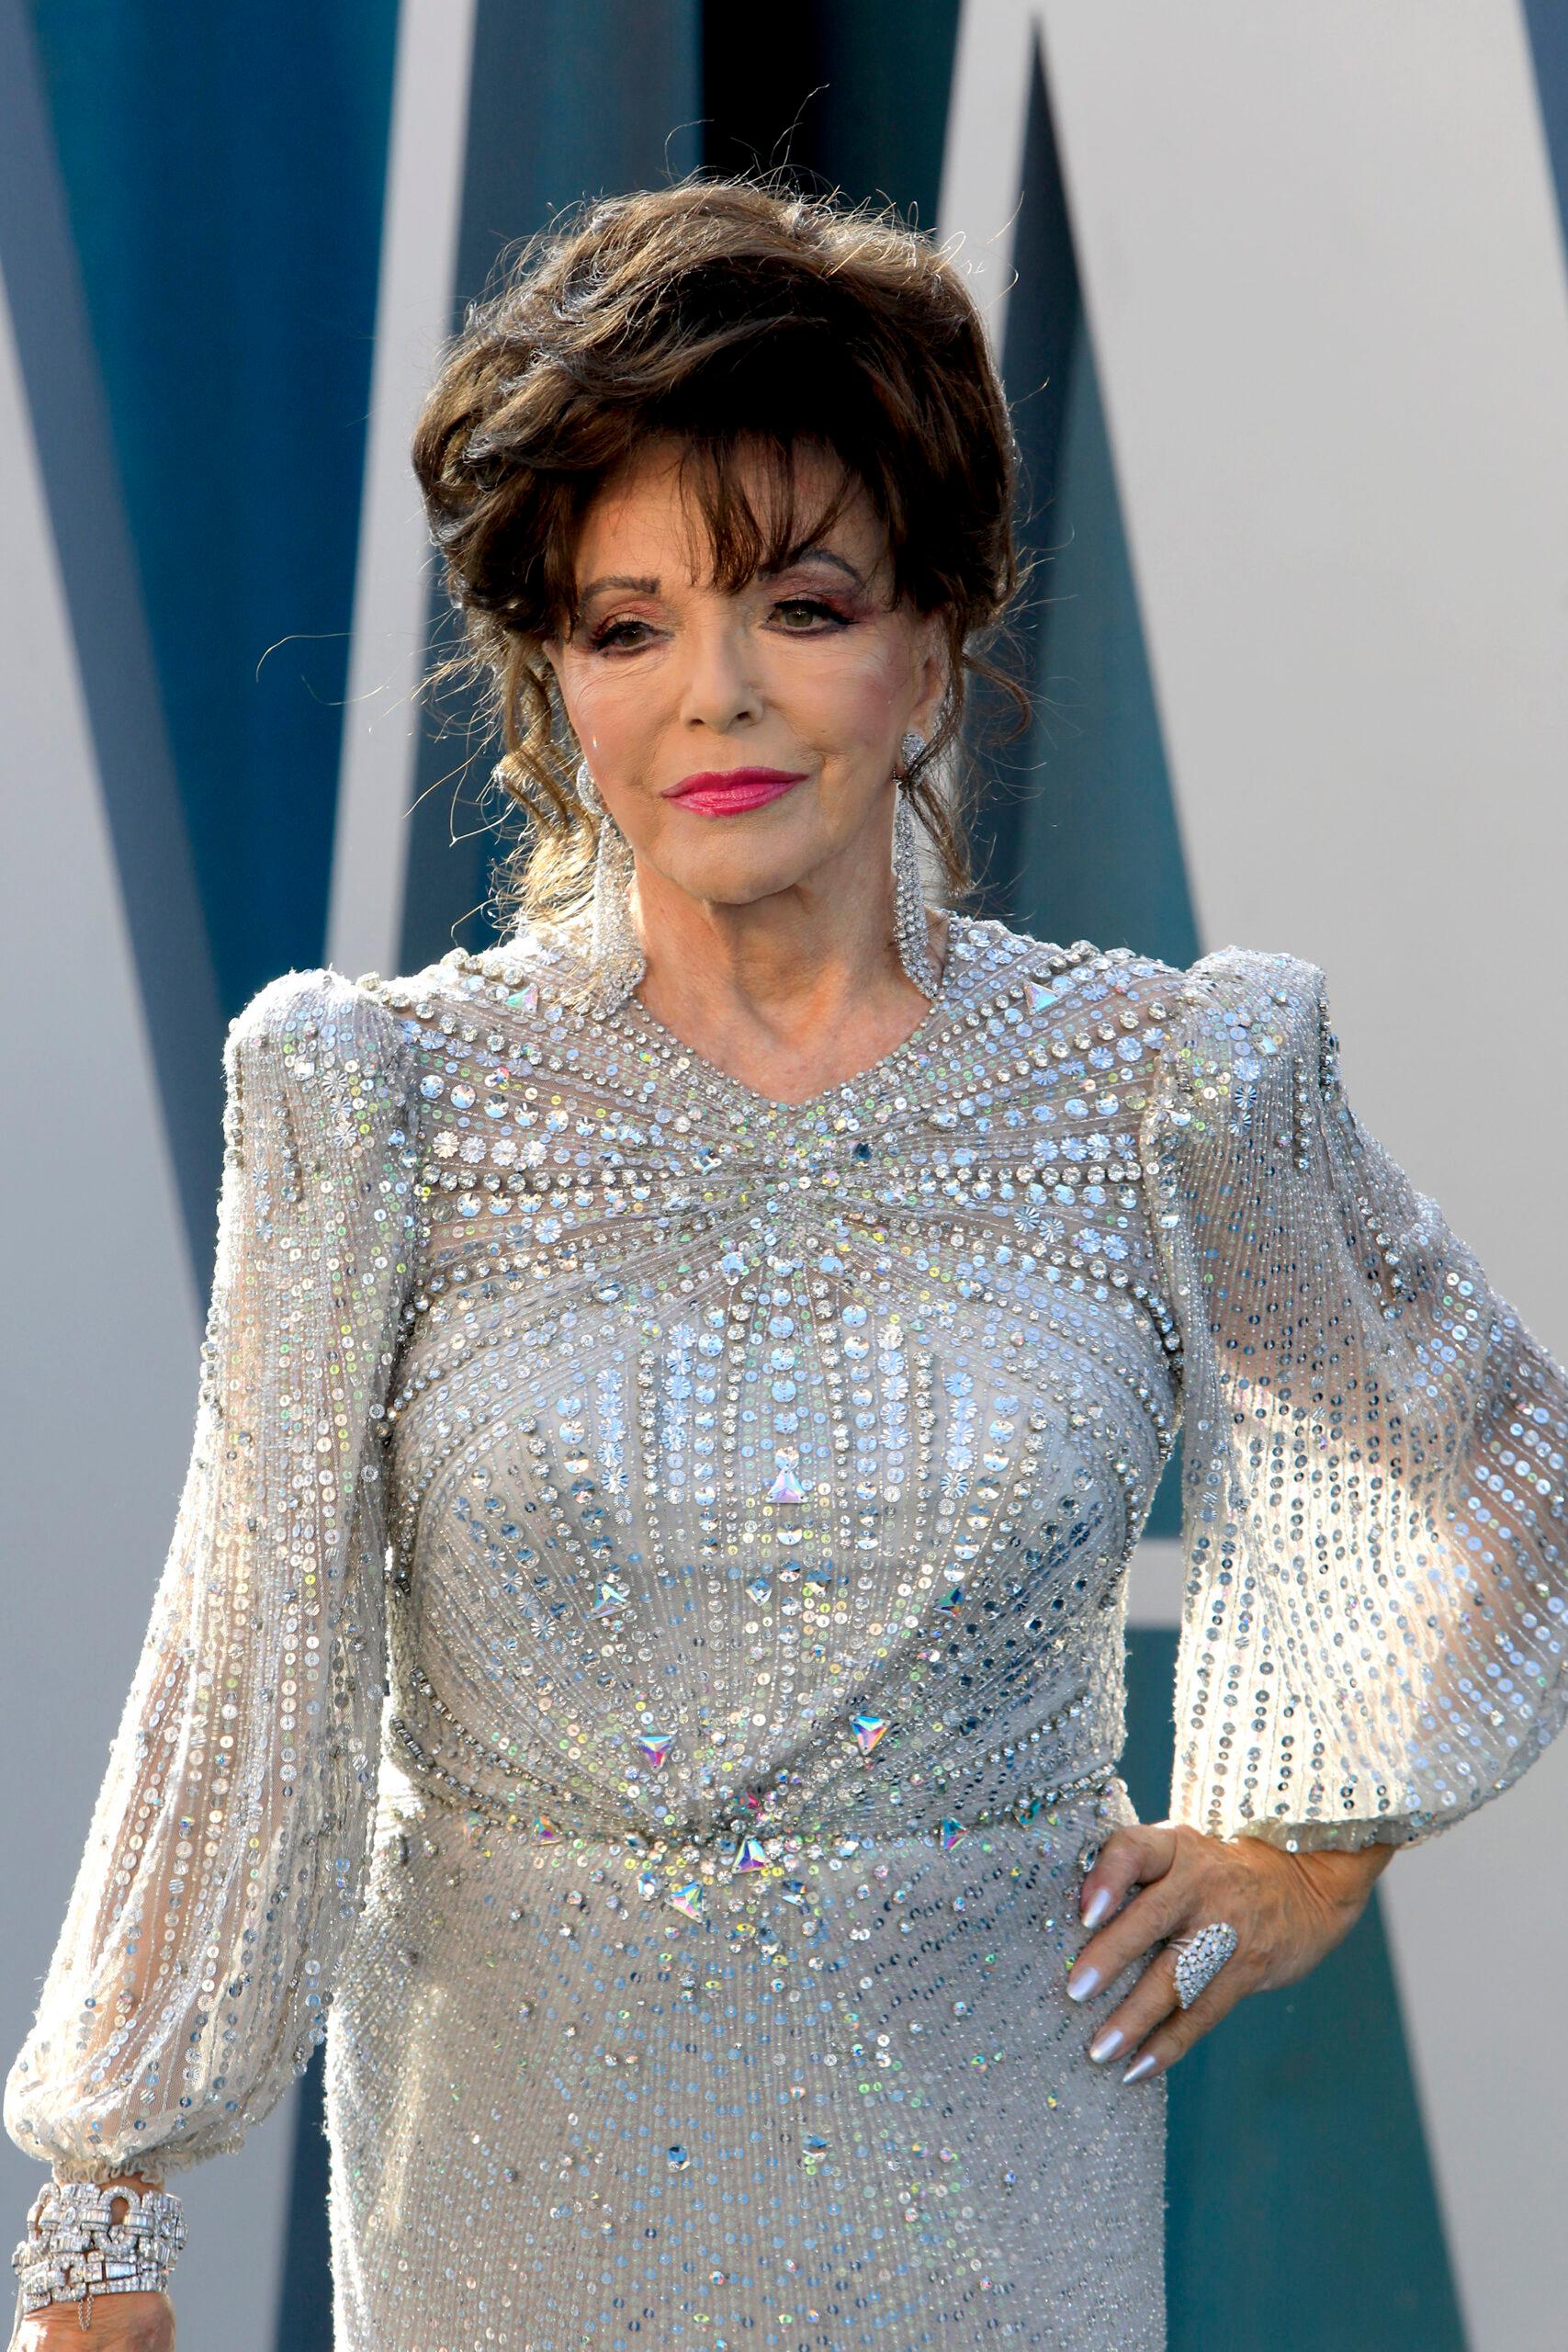 Dame Joan Collins at the Vanity Fair Oscar Party - Beverly Hills